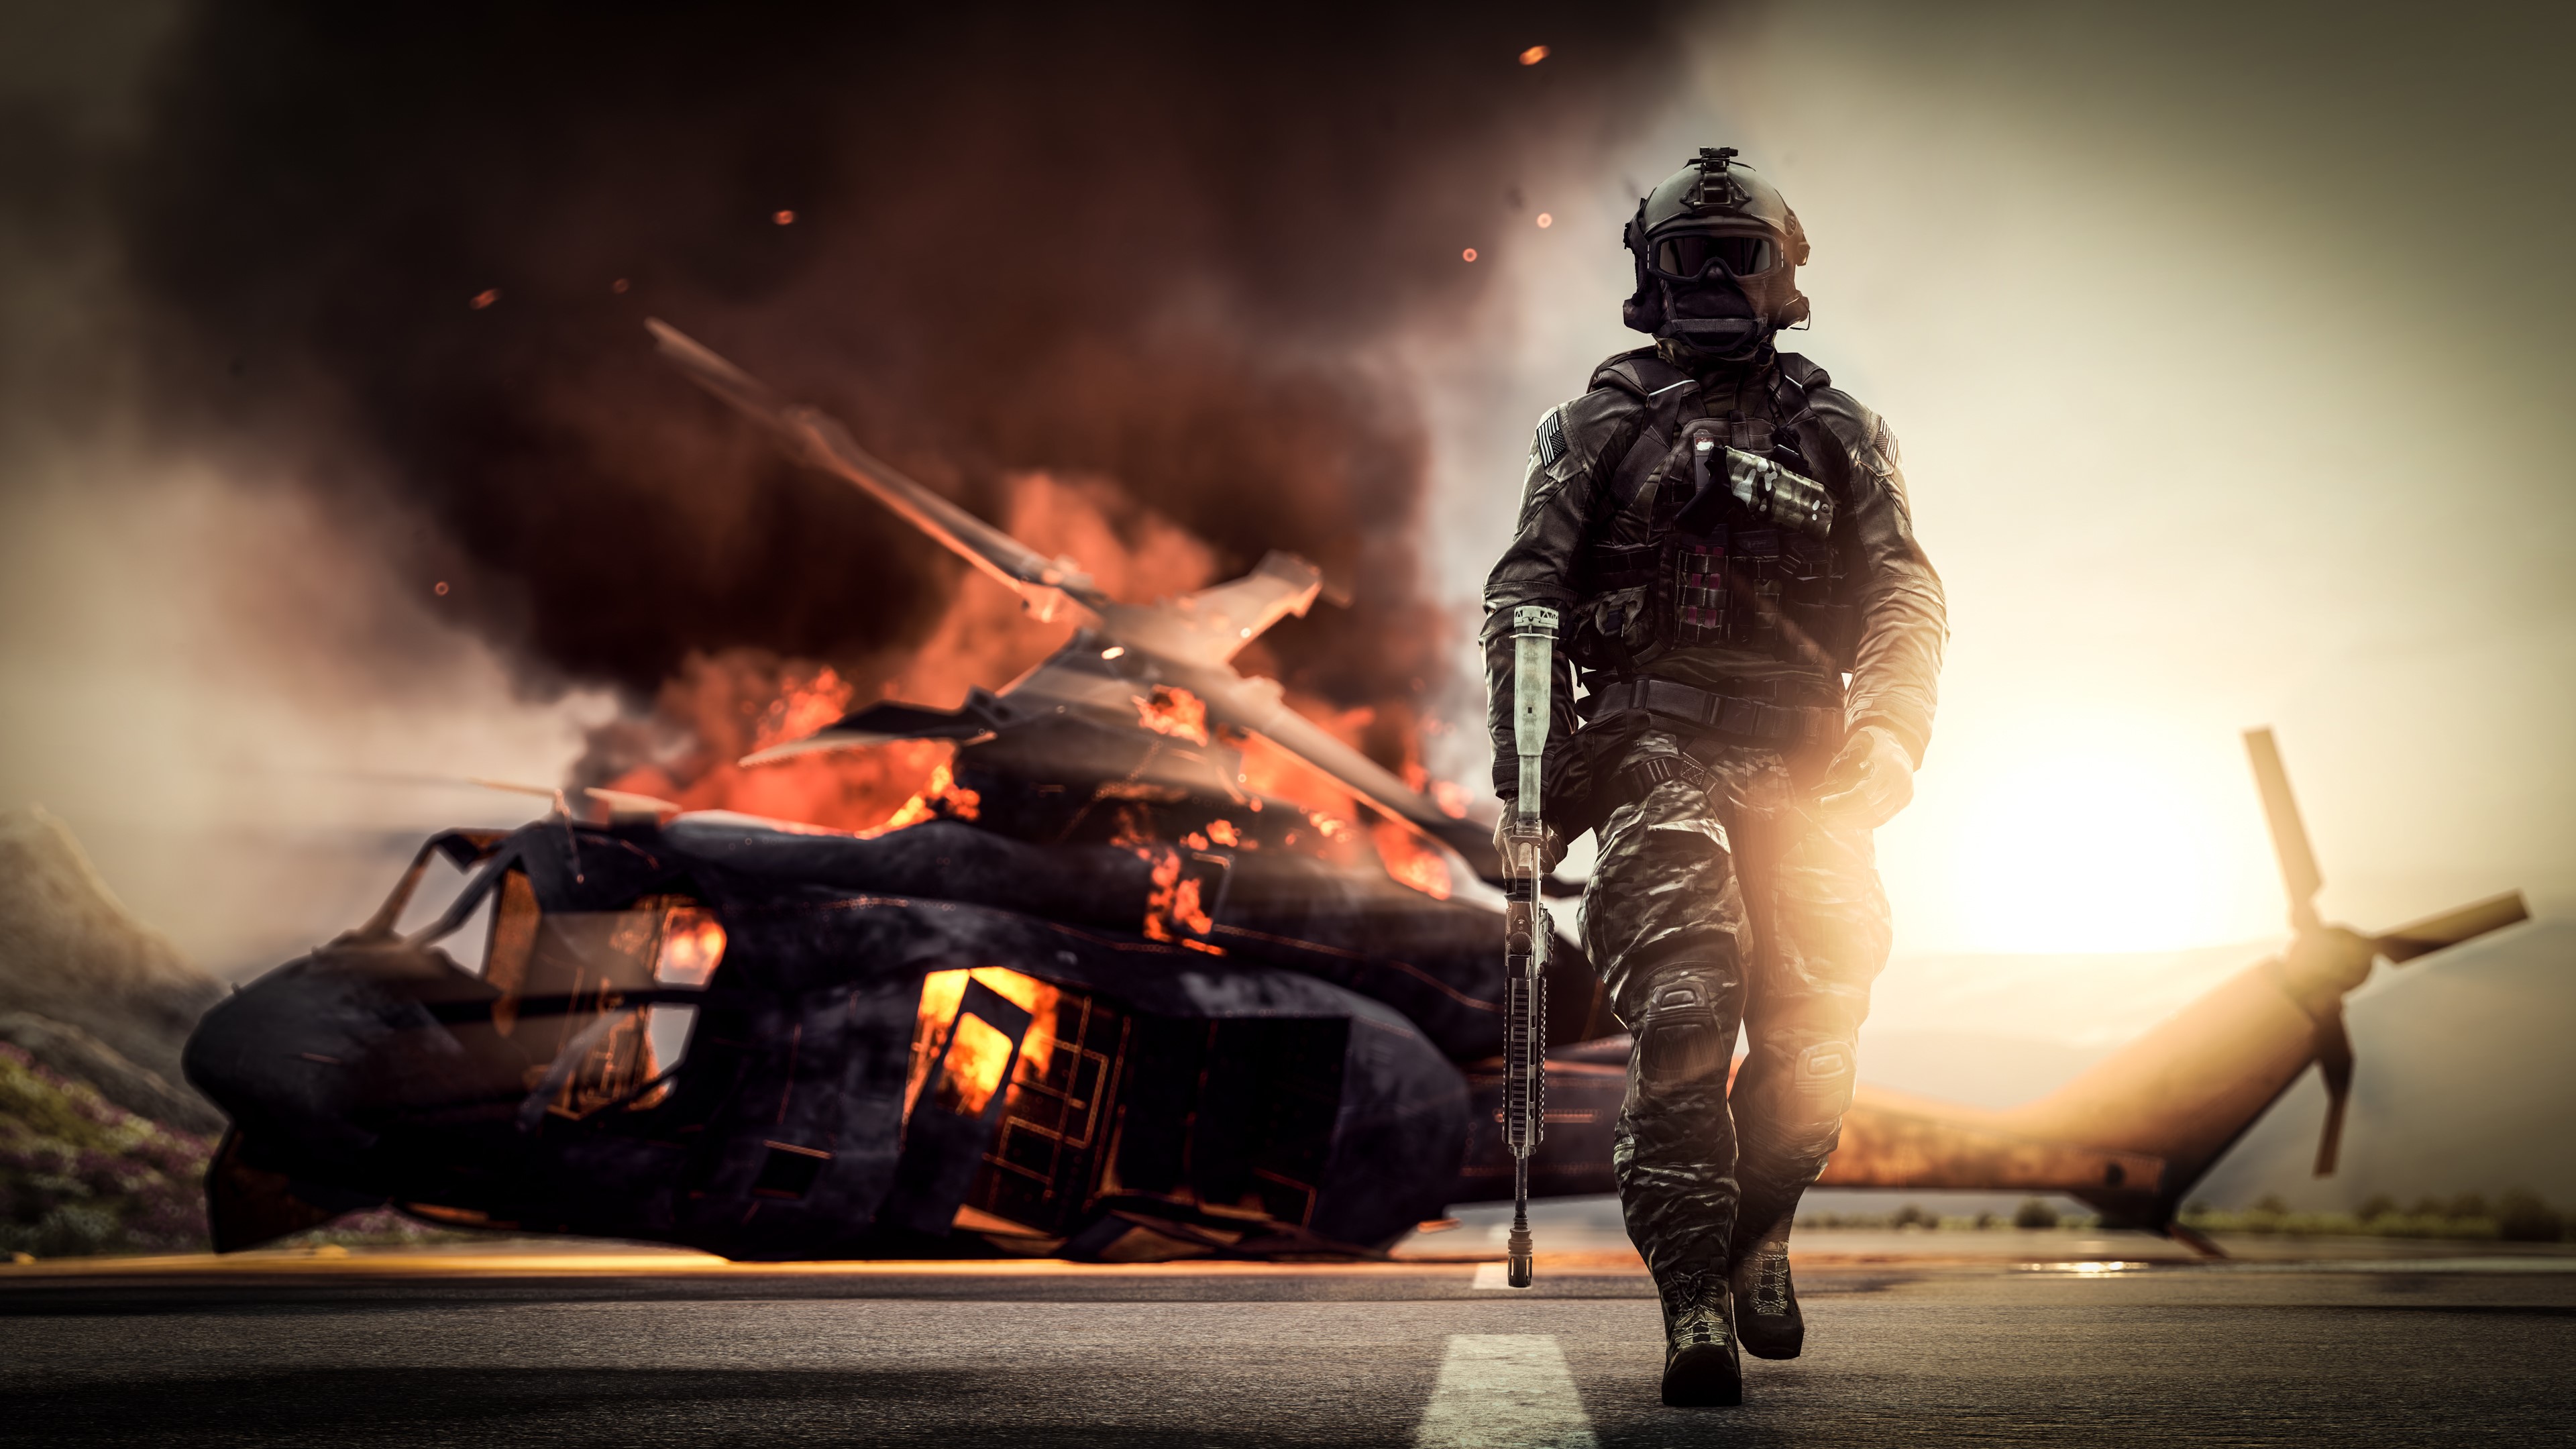 Wallpaper / battlefield ea games, games, pc games, xbox games, ps4 games, pc games, hd, 4k, soldier, helicopter free download